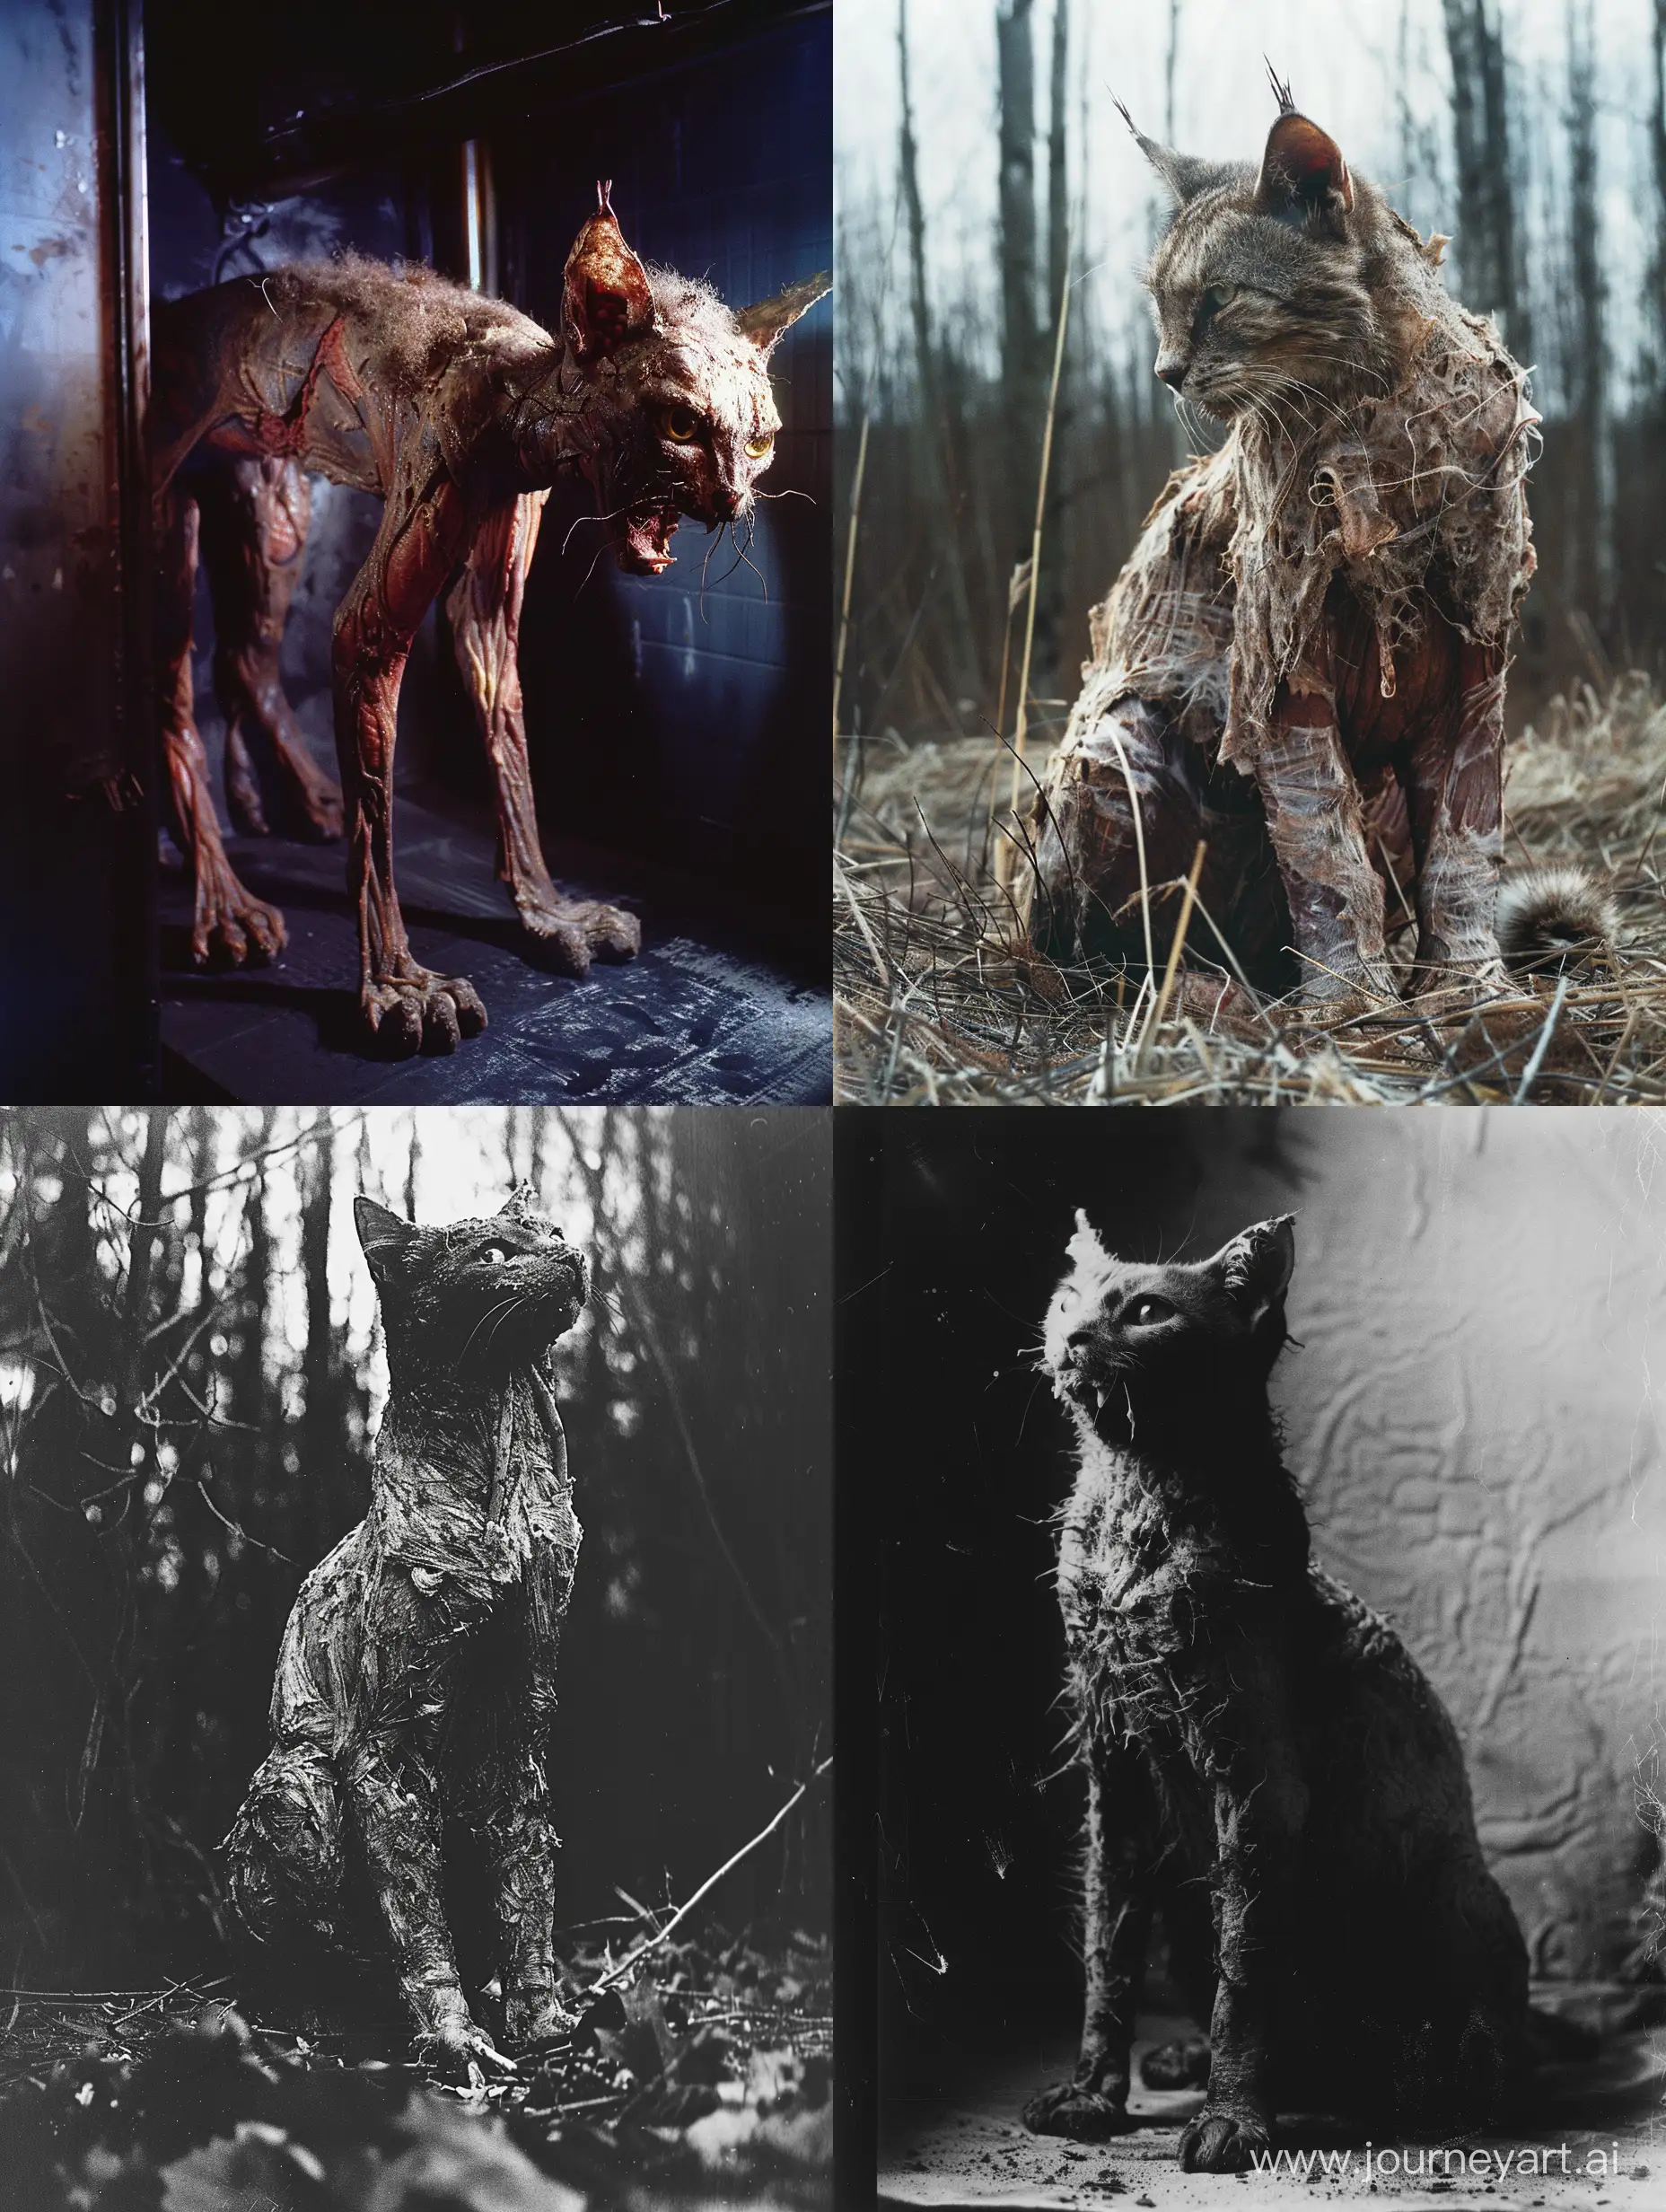 Decaying-Flesh-Large-Cat-Mysterious-Horror-Entity-with-Bizarre-Demands